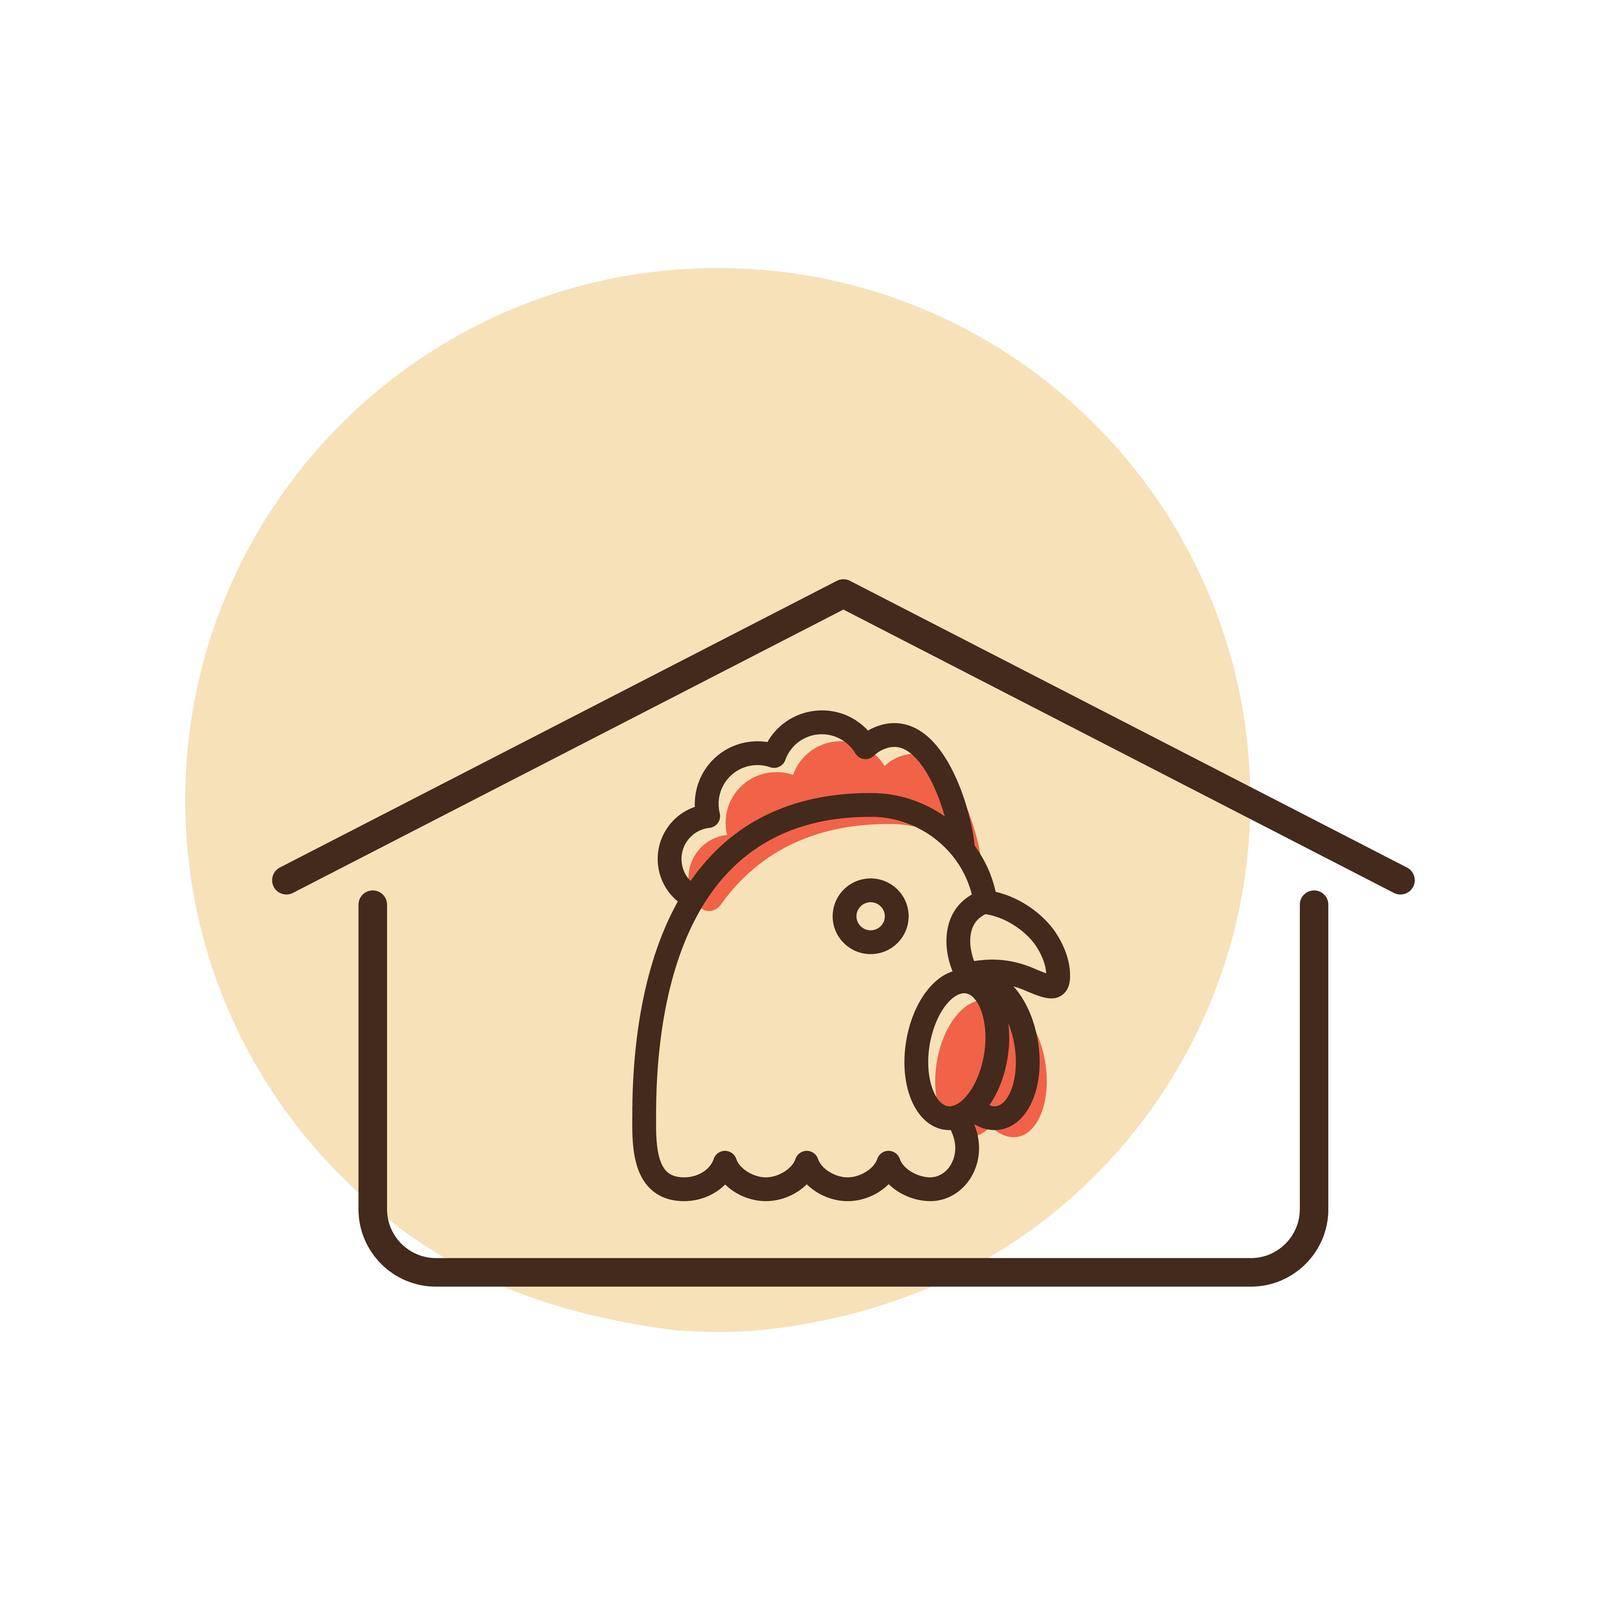 Chicken house vector icon. Farm animal sign by nosik